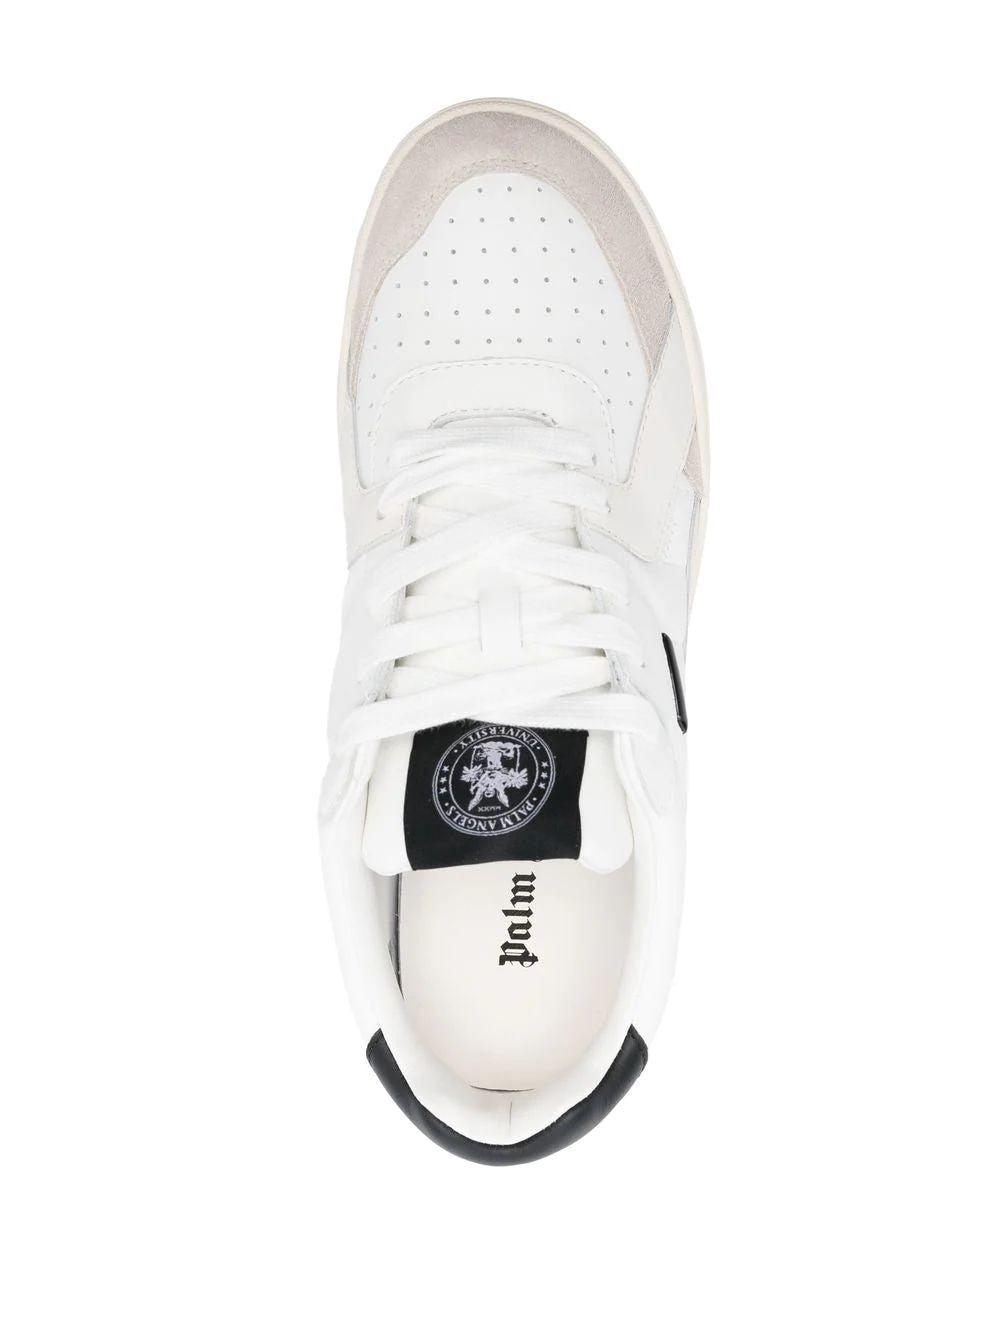 Palm Angels University Low-top Sneakers in White for Men | Lyst